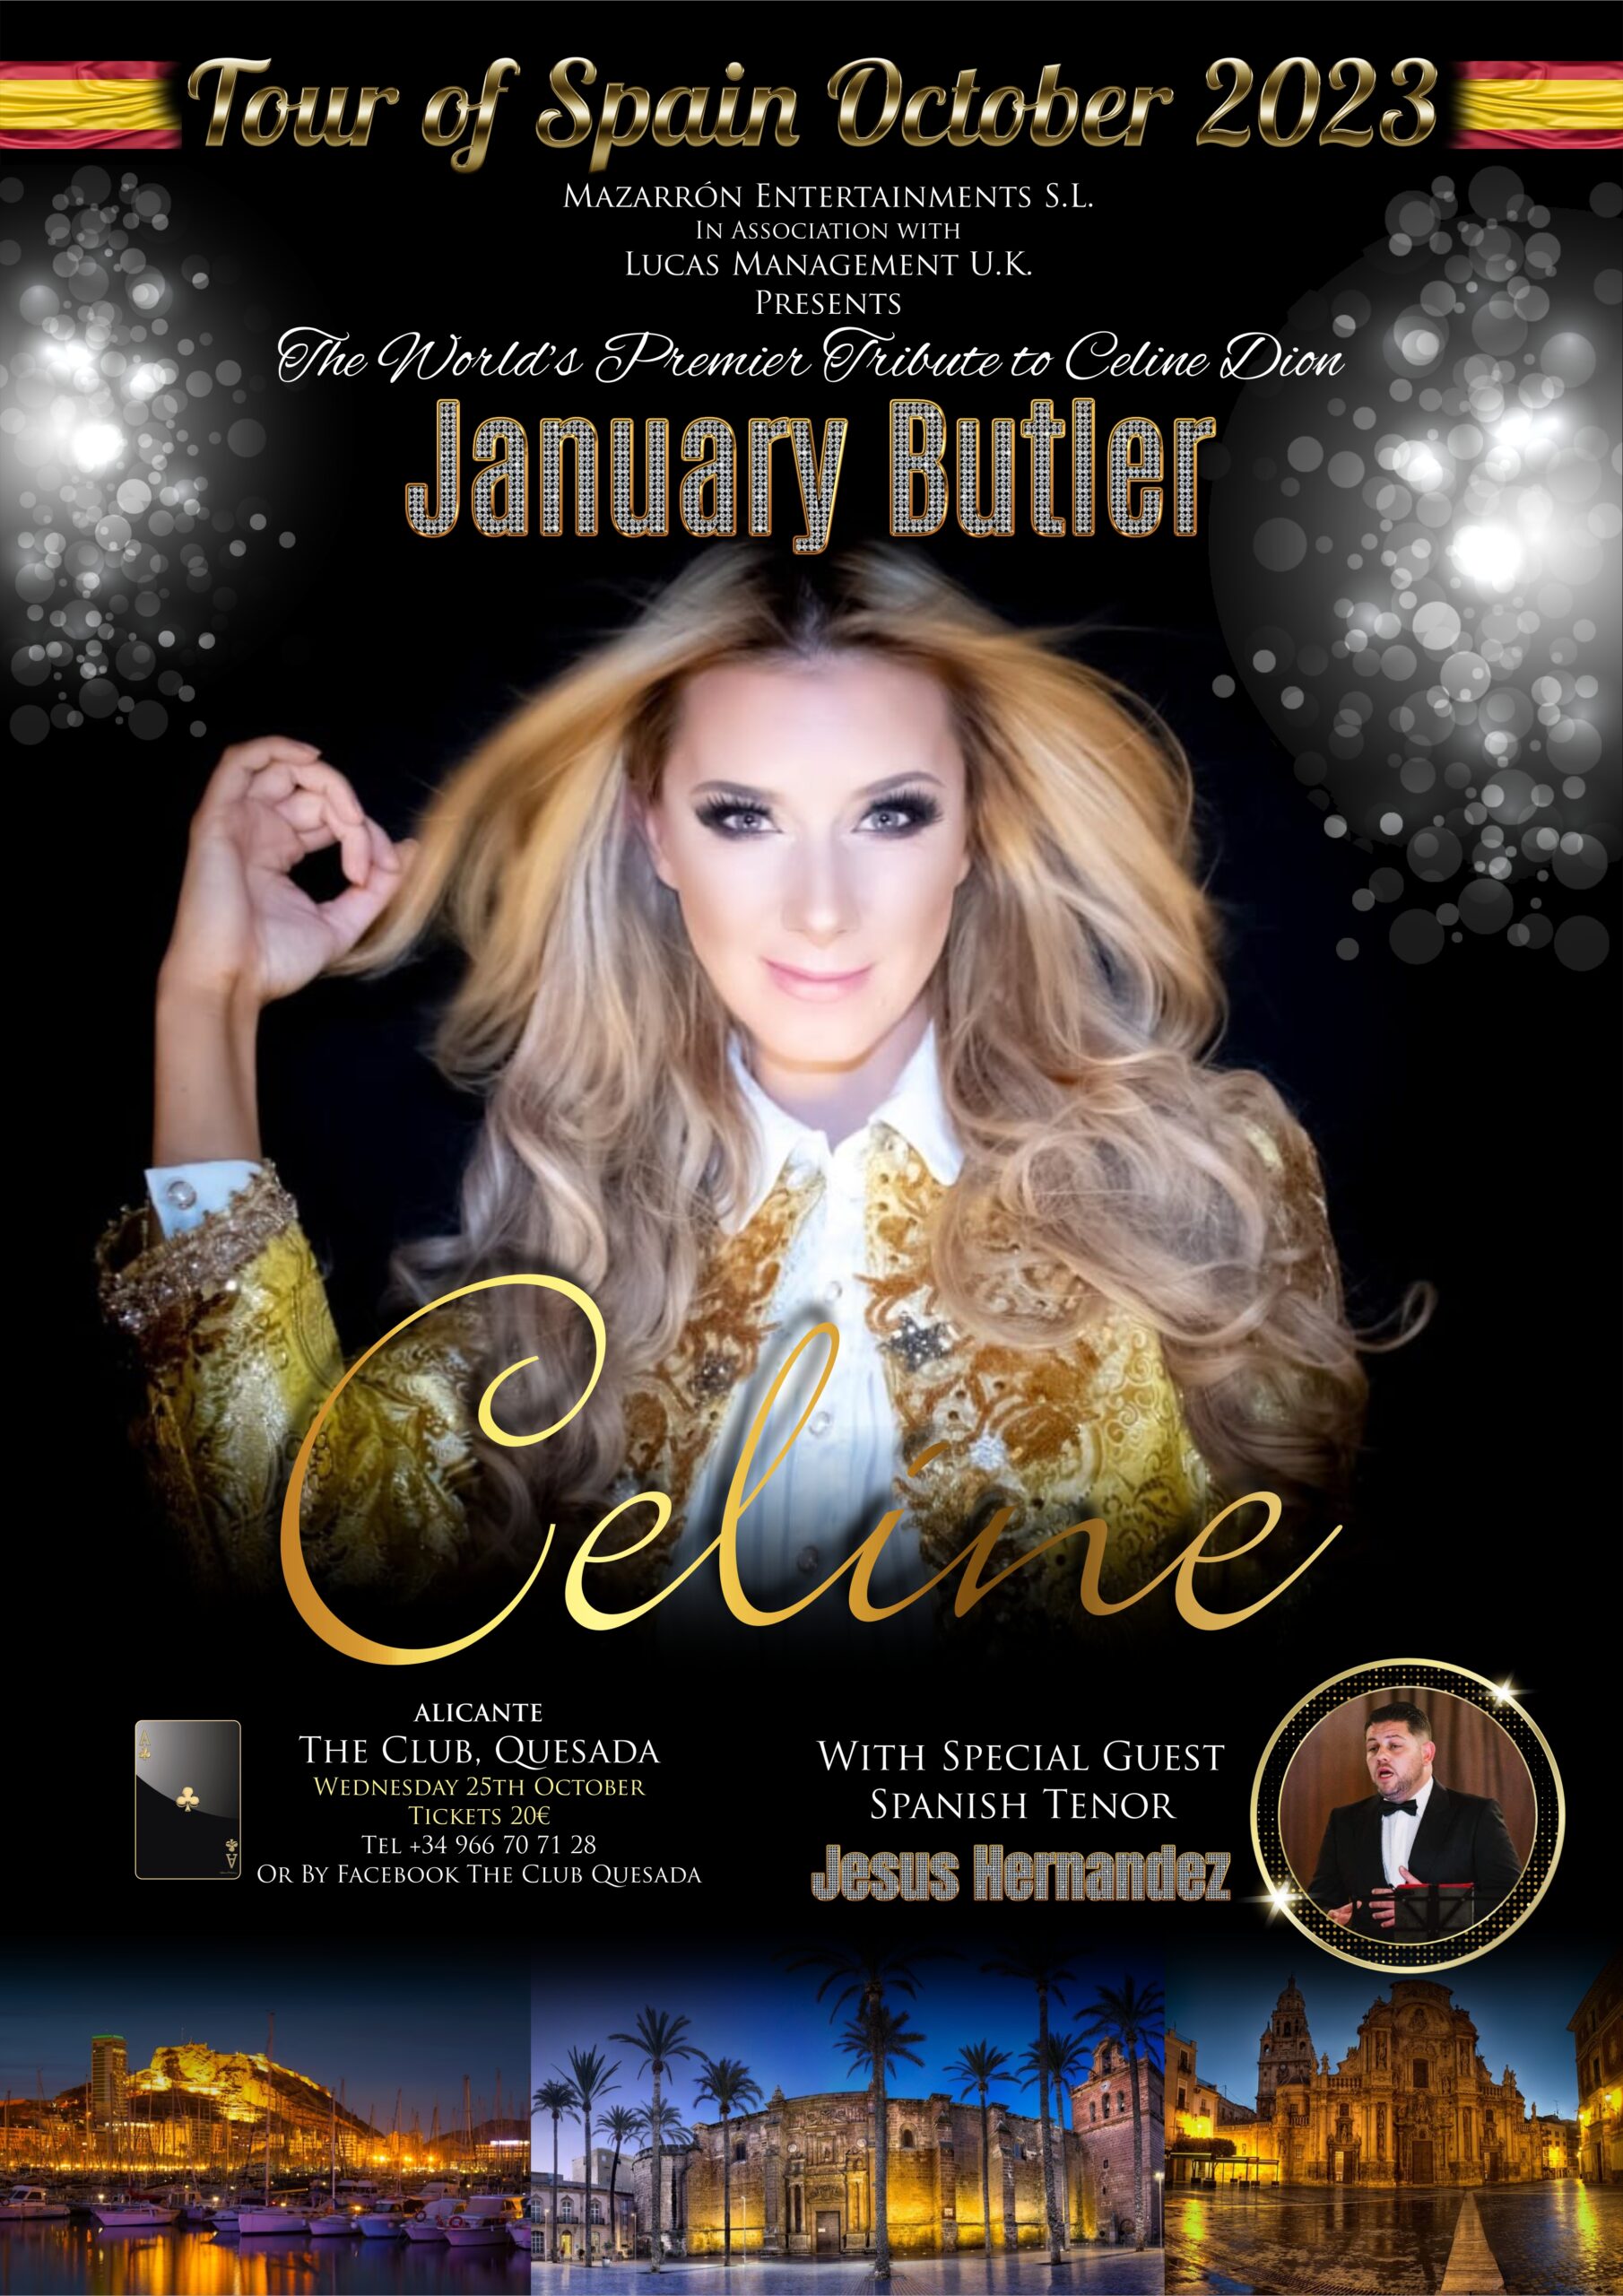 January Butler the AMAZING Celine Dion Tribute Act...